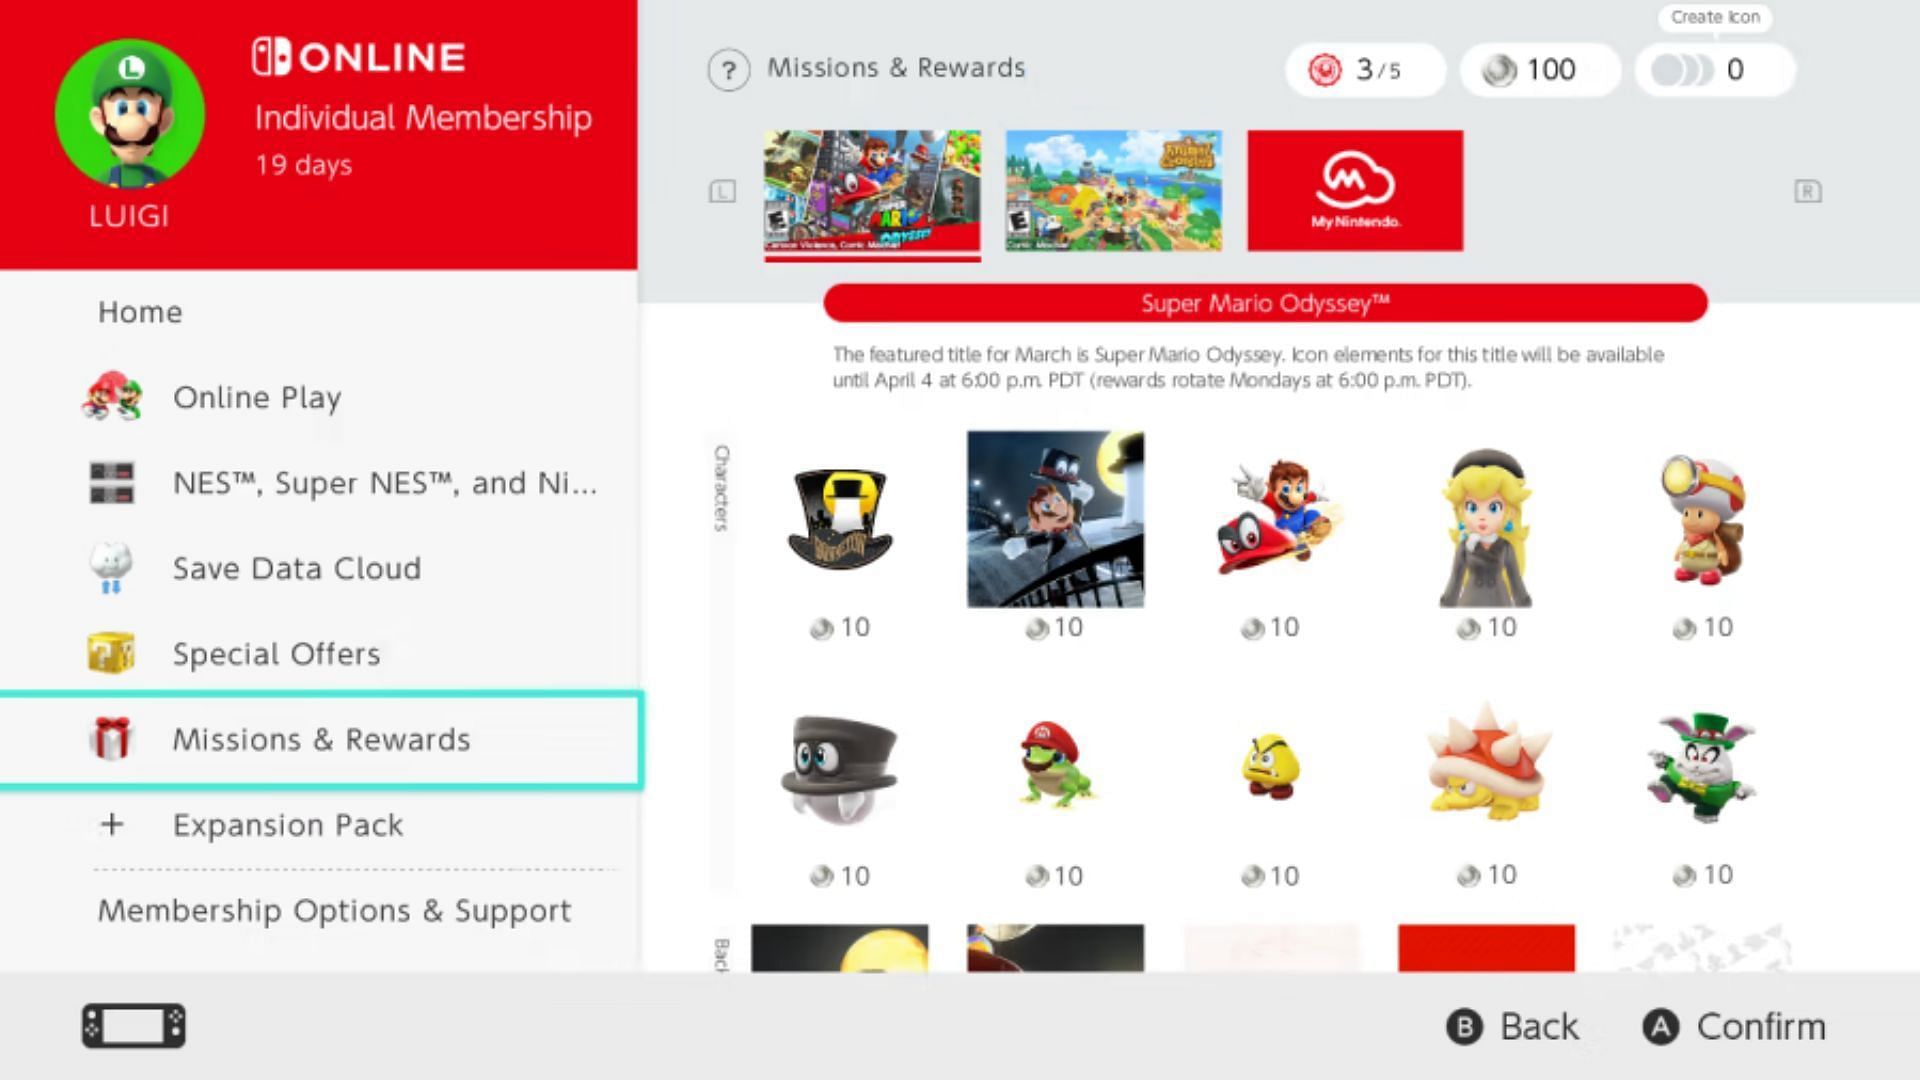 Cloud save feature can be a lifesaver in case of a lost Switch or corrupted cartridge. (Image via Nintendo)